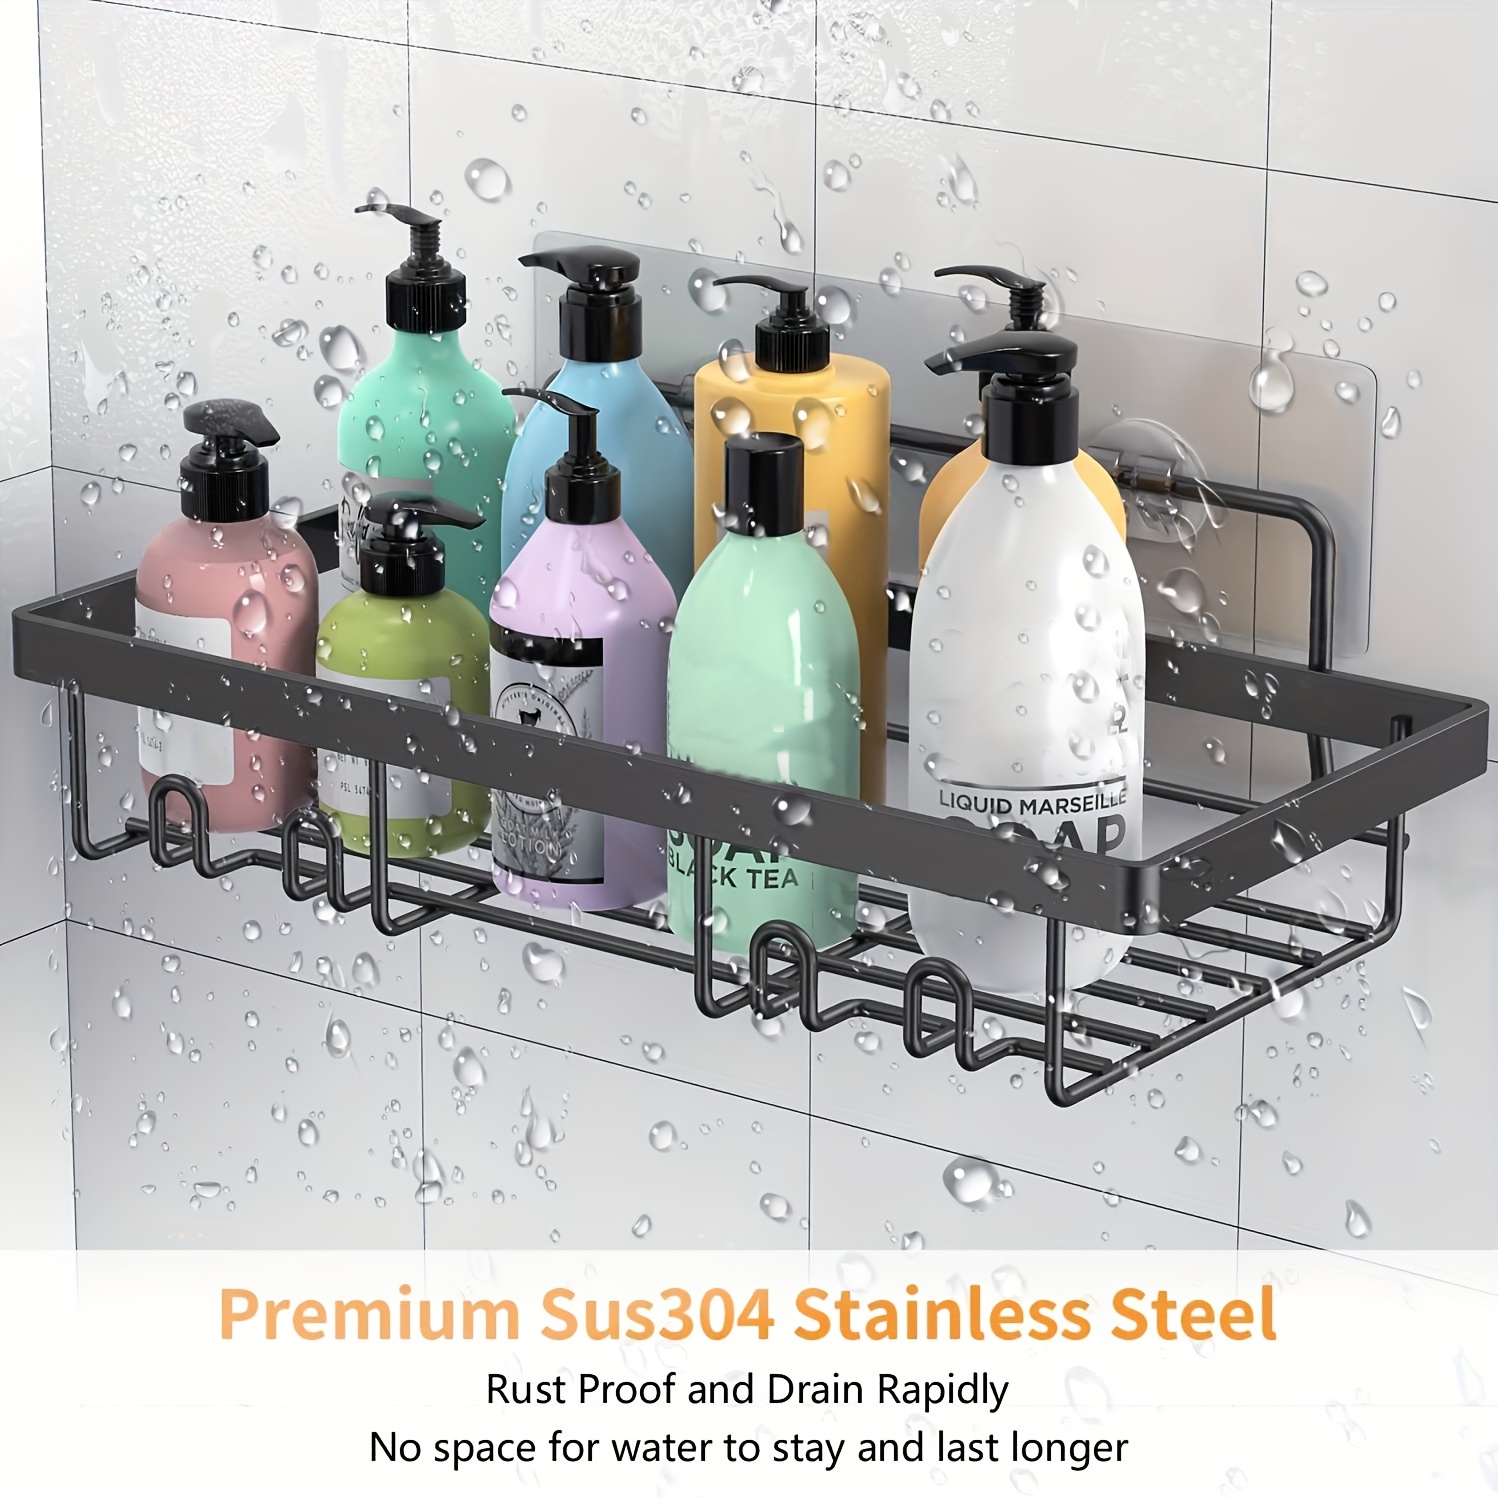 Shower Caddy, Bathroom Organizer Adhesive Shower Shelf [3-Pack], Rustproof  Shower Shelves, No Drilling Required, Shower Organizer Perfect For Holding  Shampoo, Soap And More